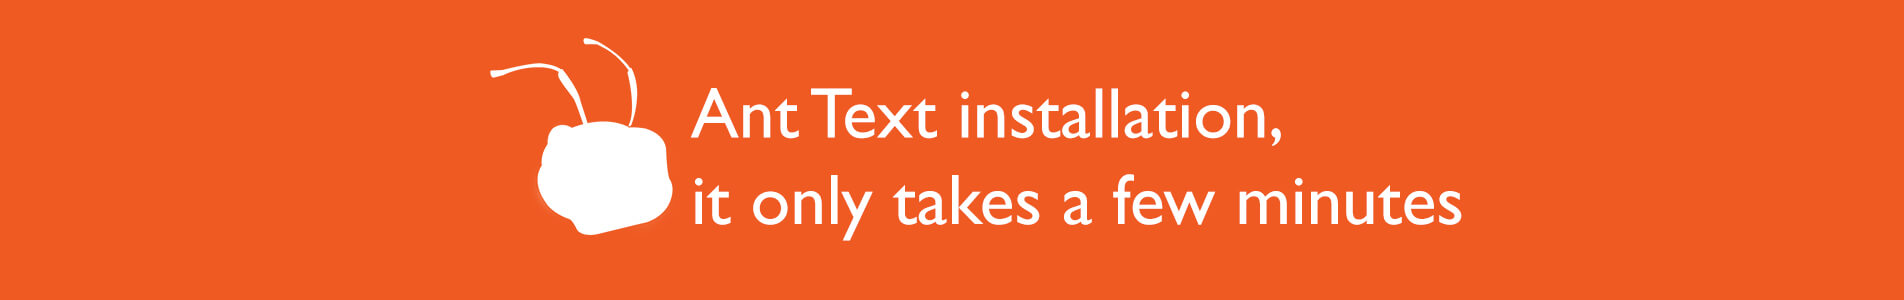 Header Ant Text installation - it only takes a few minutes